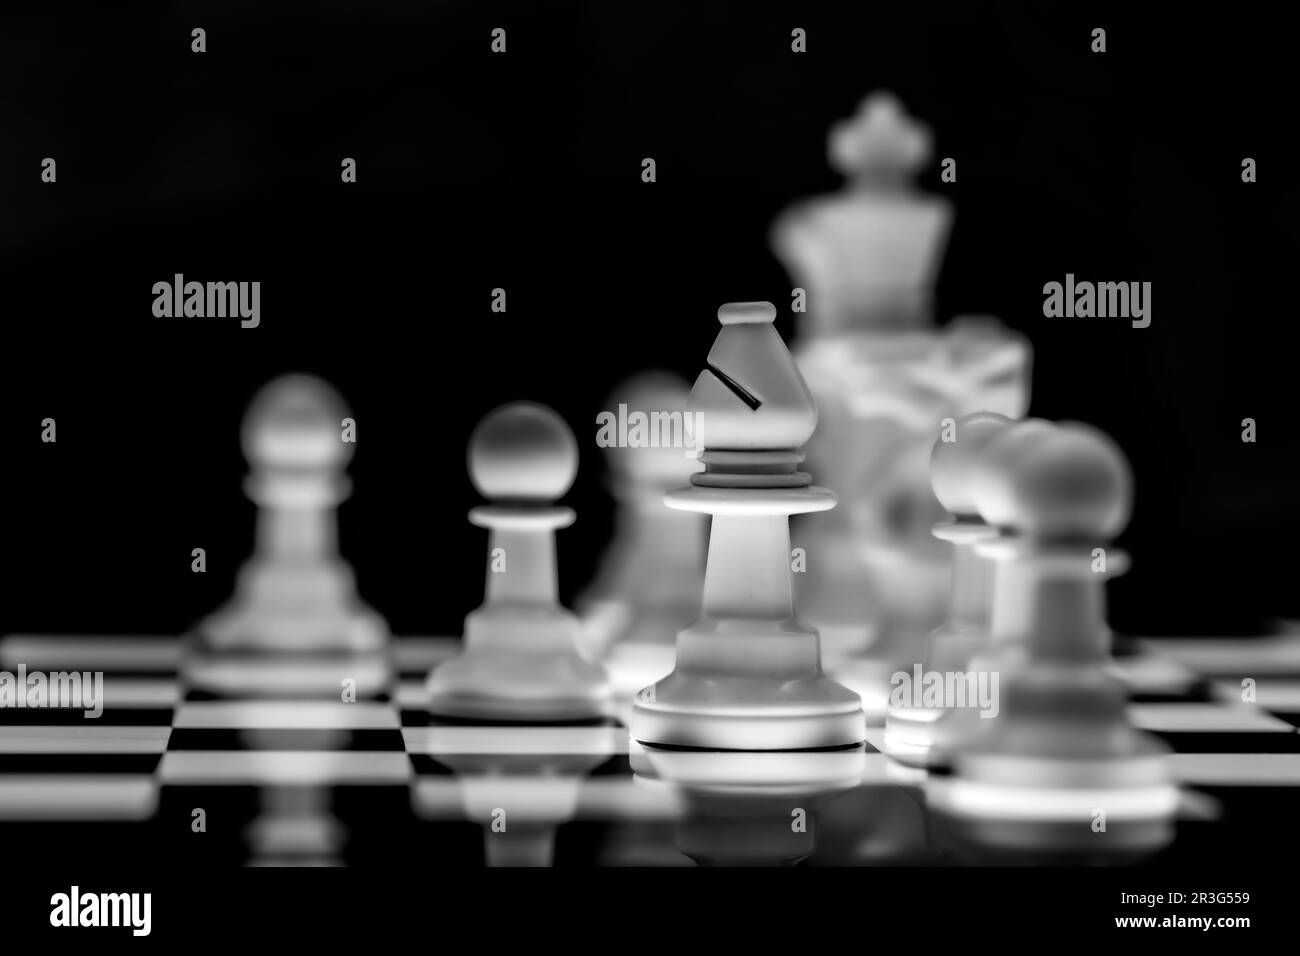 Close up of Chess pieces on a reflective mirror board surface with black background Stock Photo